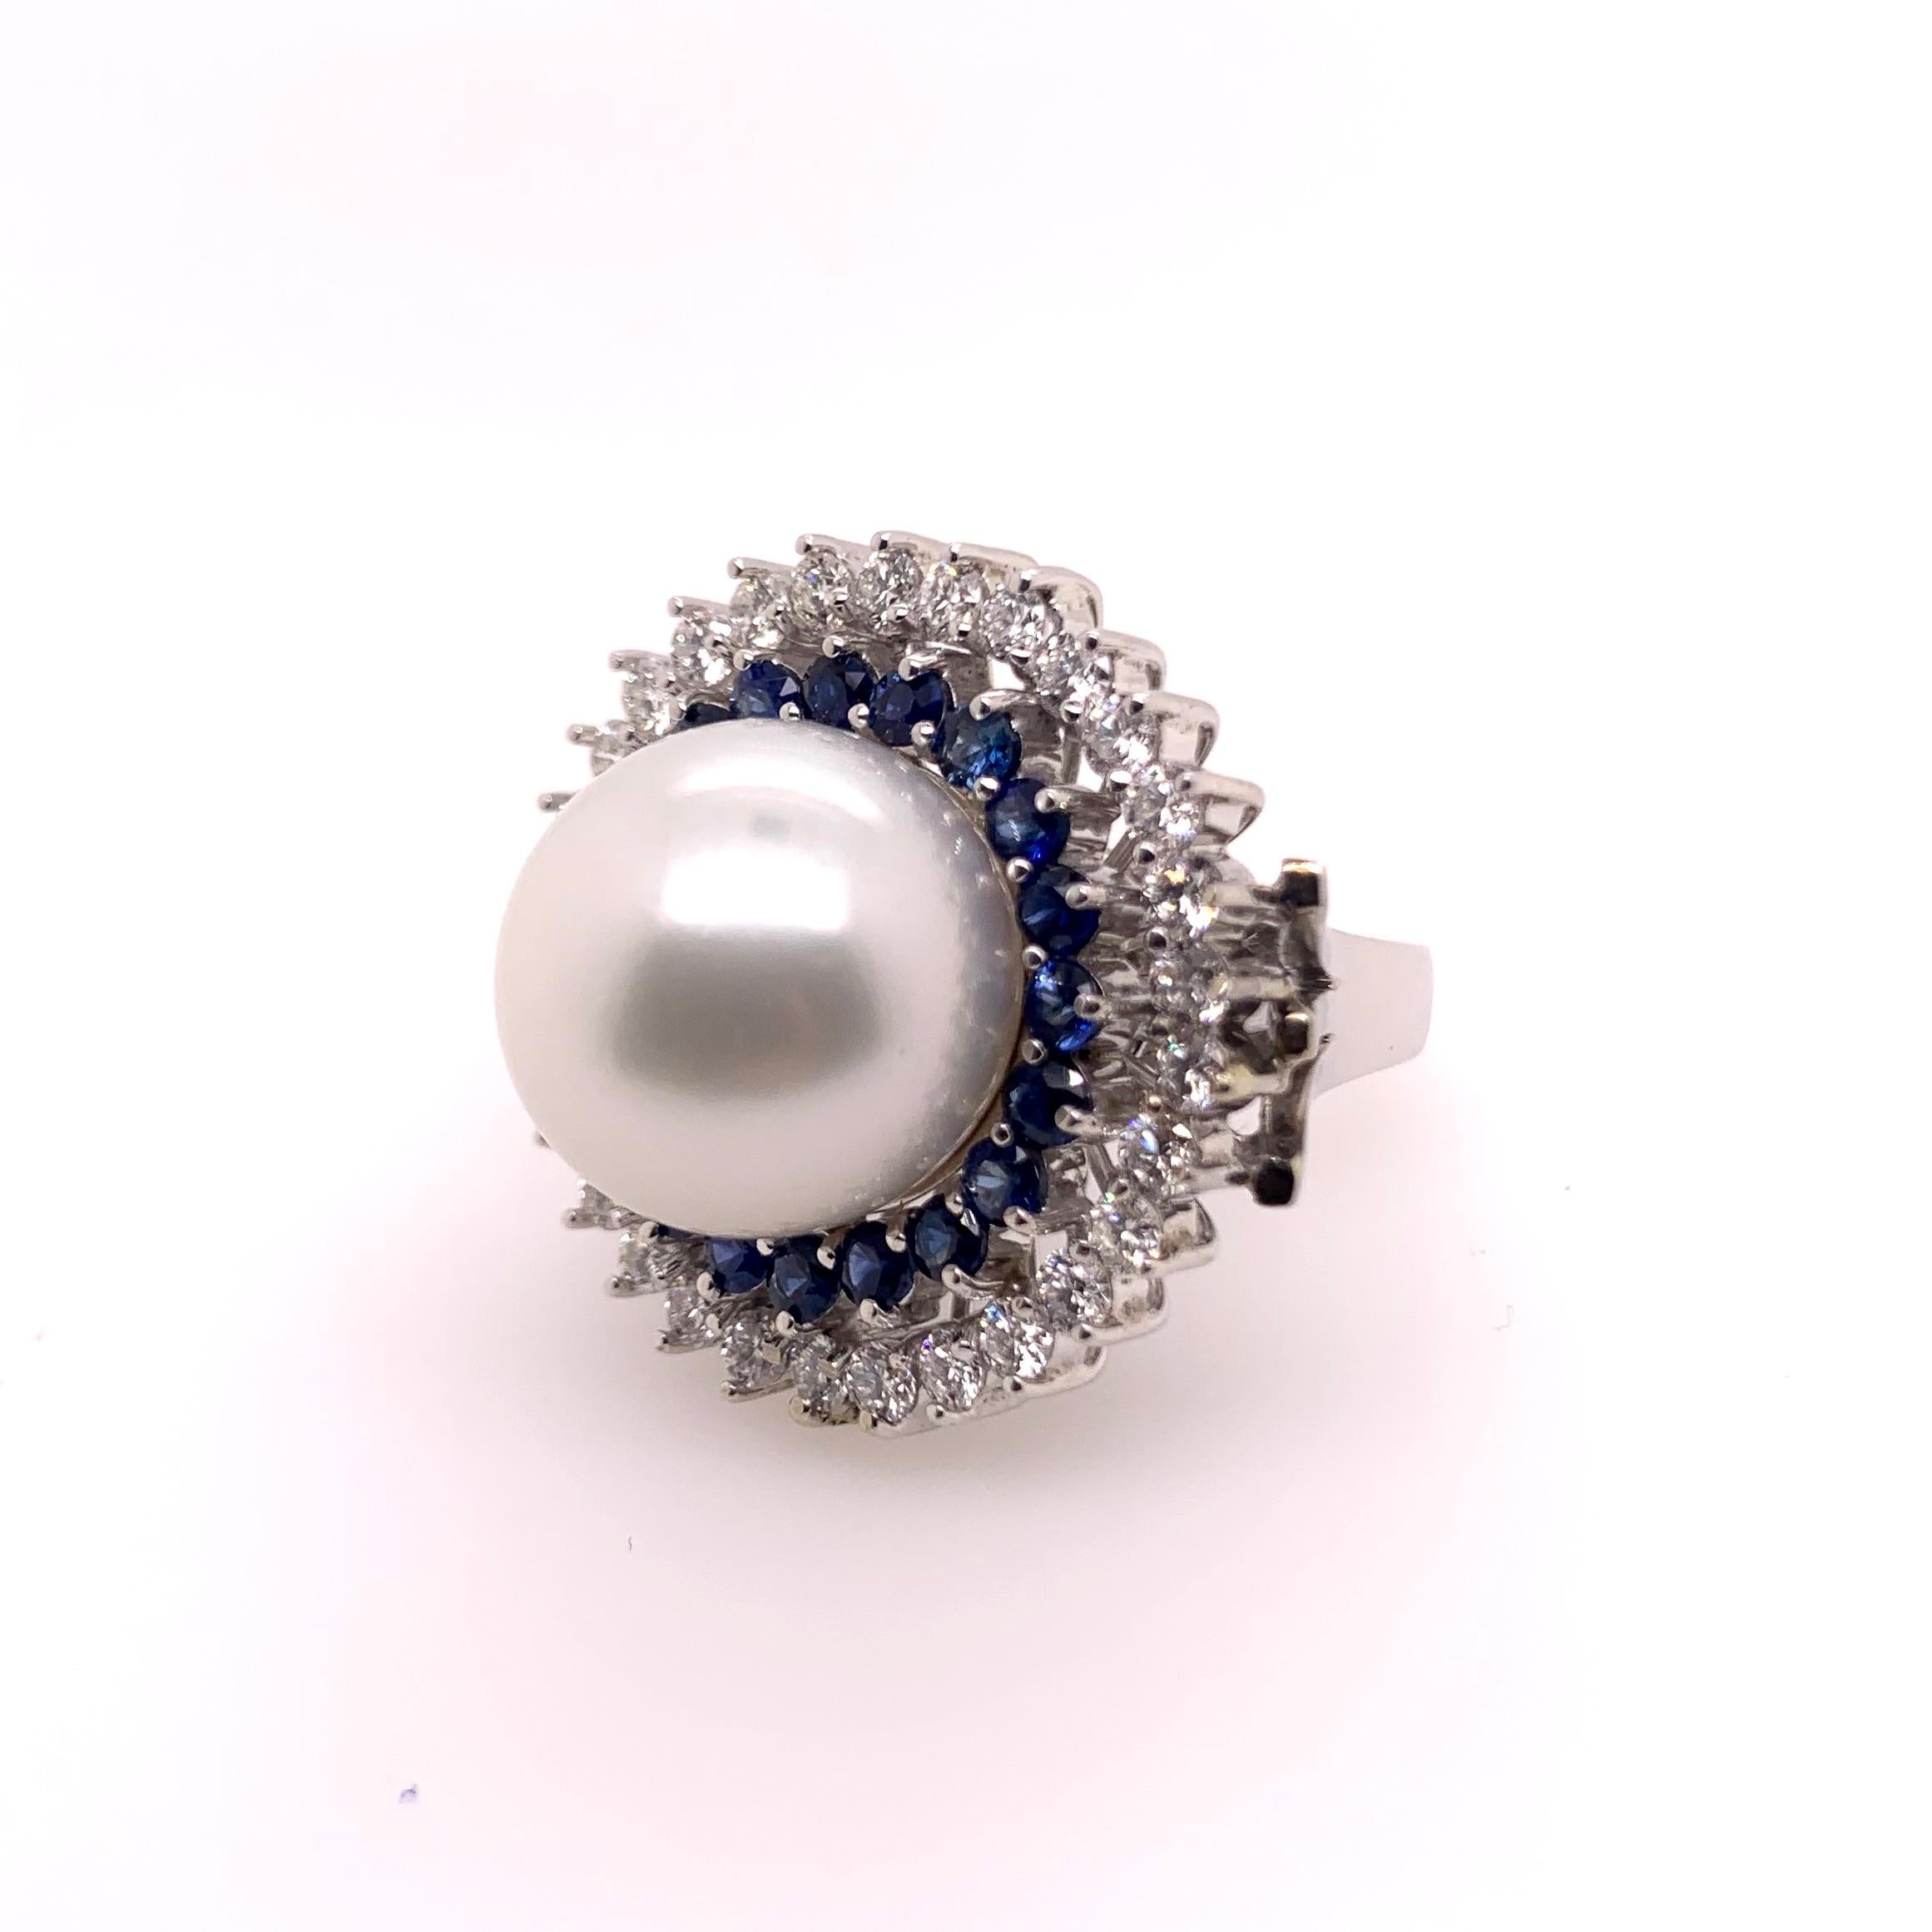 This captivating white south sea pearl ring is set in an uniquely made setting with a double row of blue sapphires and diamonds.   The 15mm pearl has enormous luster and is highlighted by the contrast of the round cut sapphires and diamonds.  The